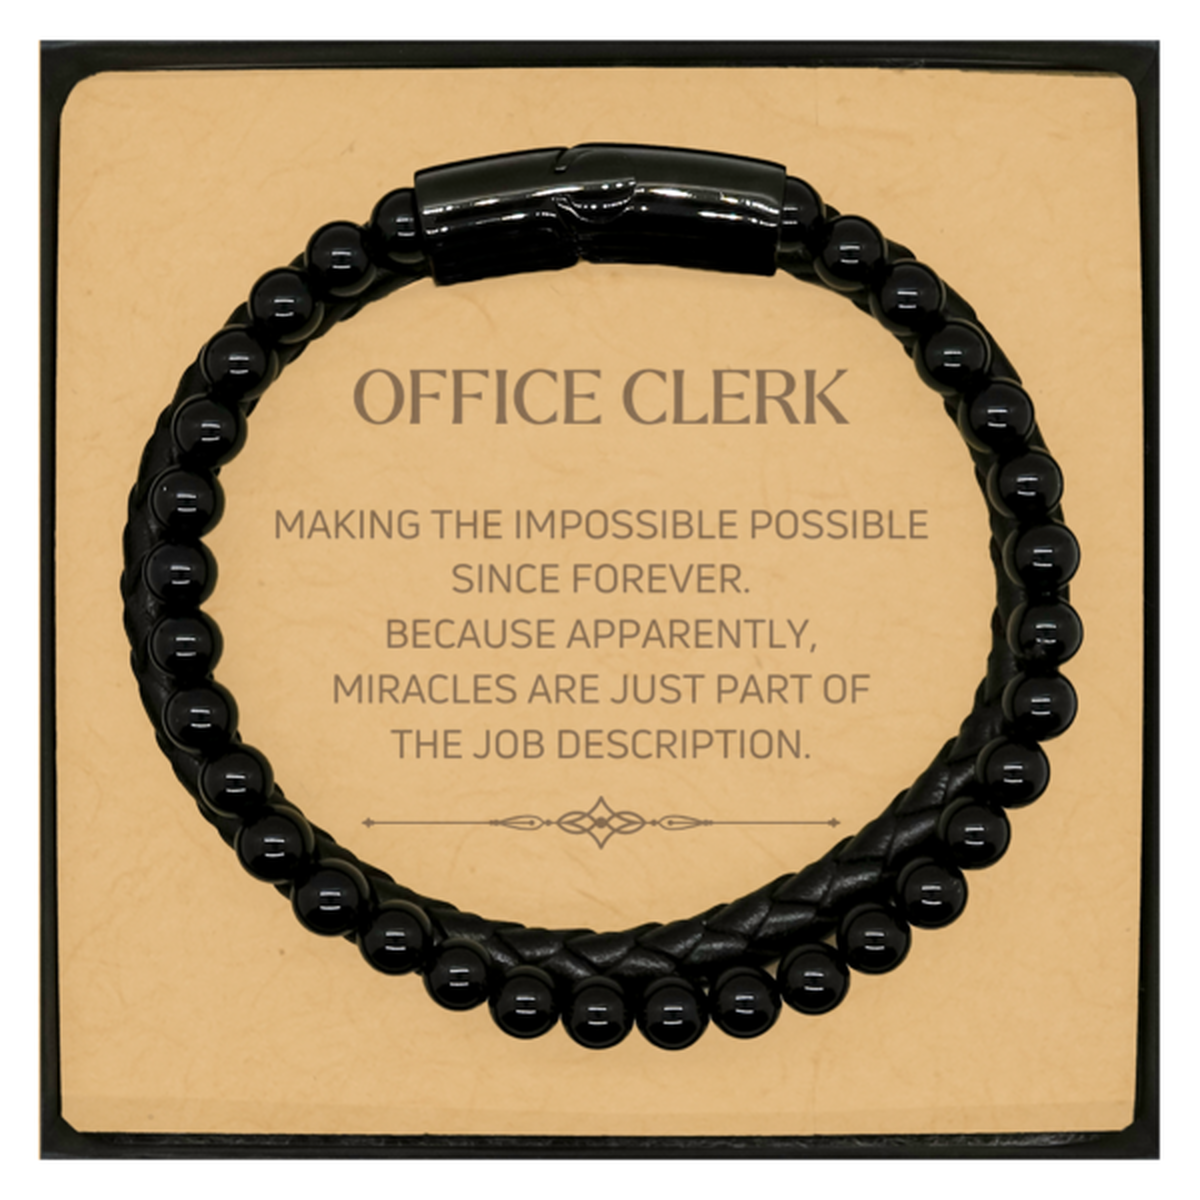 Funny Office Clerk Gifts, Miracles are just part of the job description, Inspirational Birthday Christmas Stone Leather Bracelets For Office Clerk, Men, Women, Coworkers, Friends, Boss